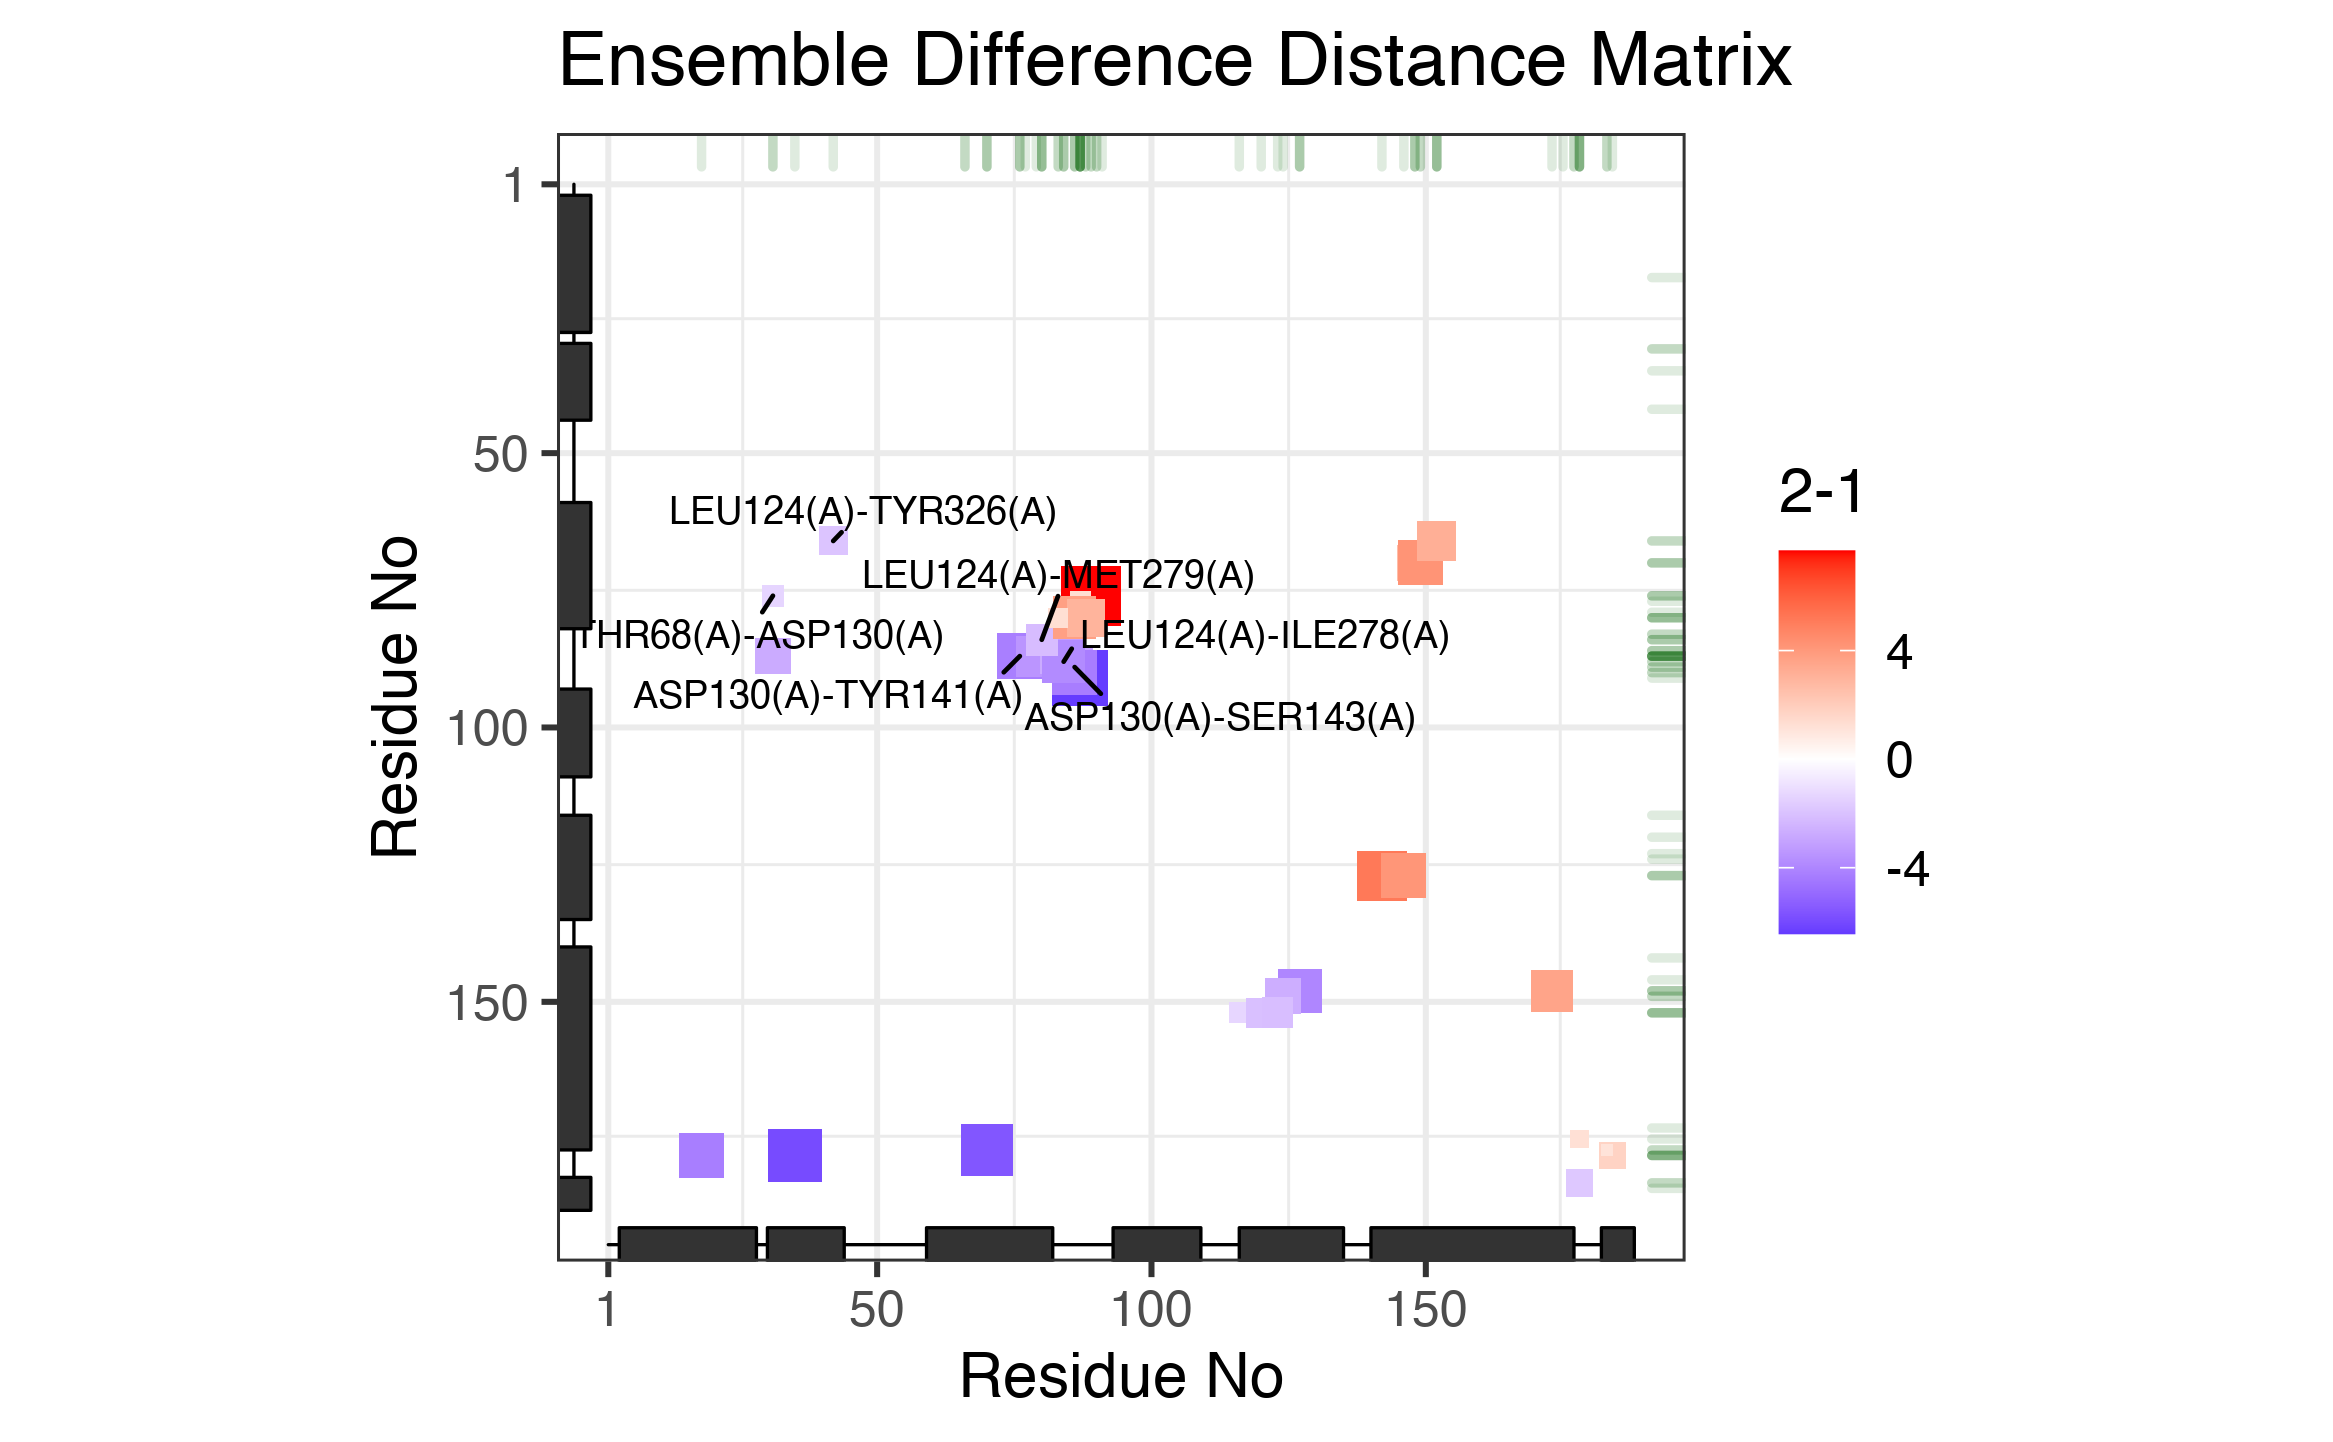 **The 'tile' plot of identified significant distance changes.** Each tile represents a residue pair with color and size scaled by the associated distance change from Group 1 to Group 2 (unit: angstrom).